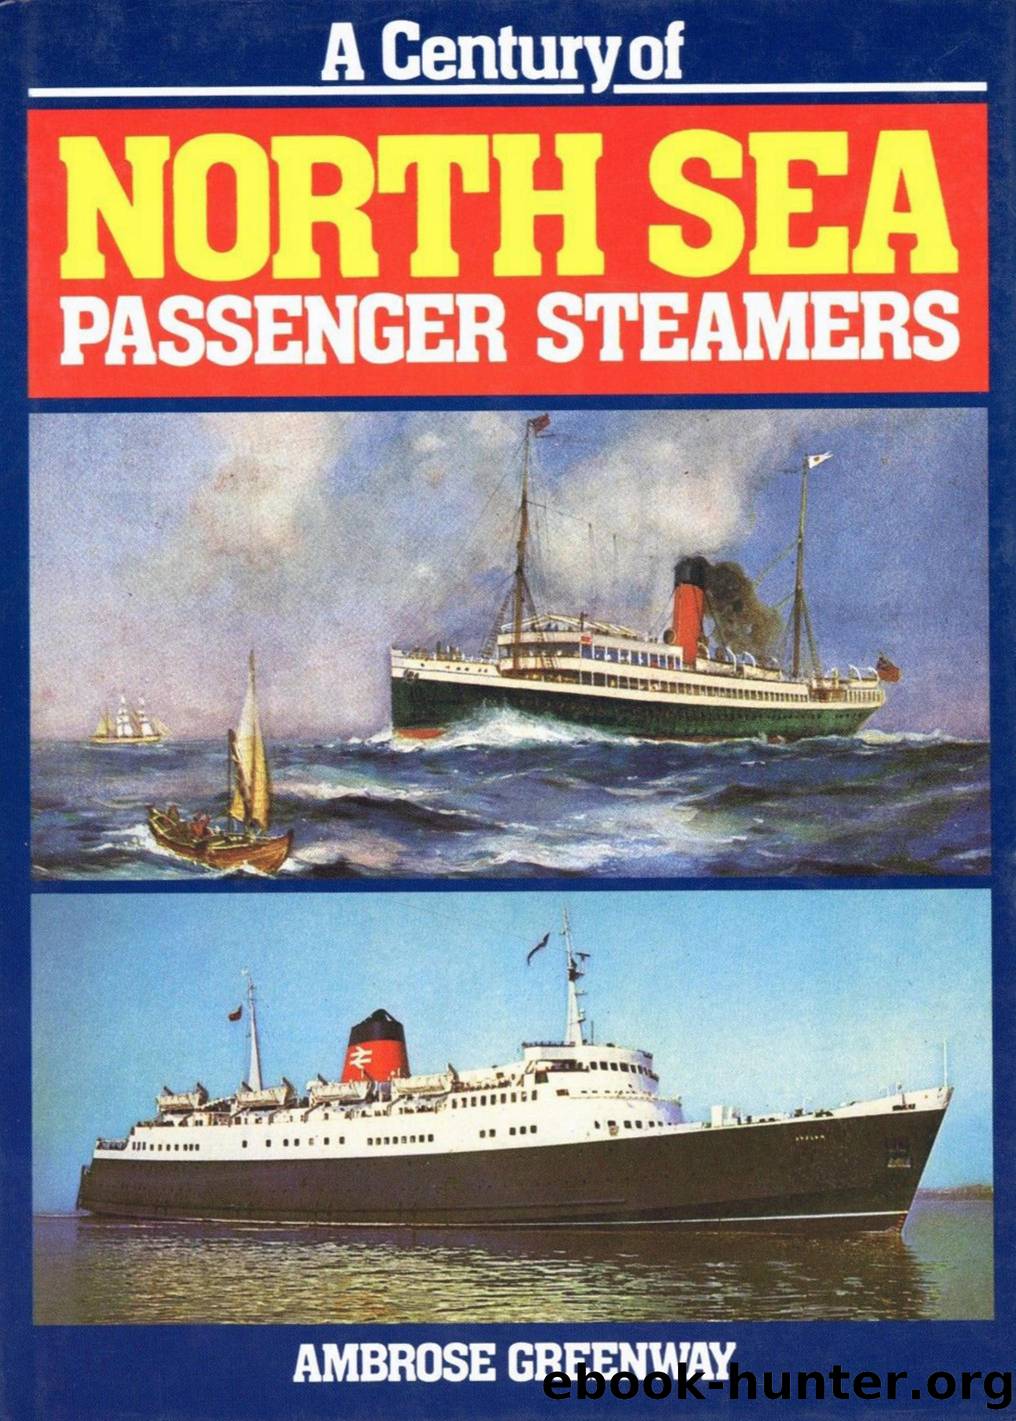 A Century of North Sea Passenger Steamers by Unknown